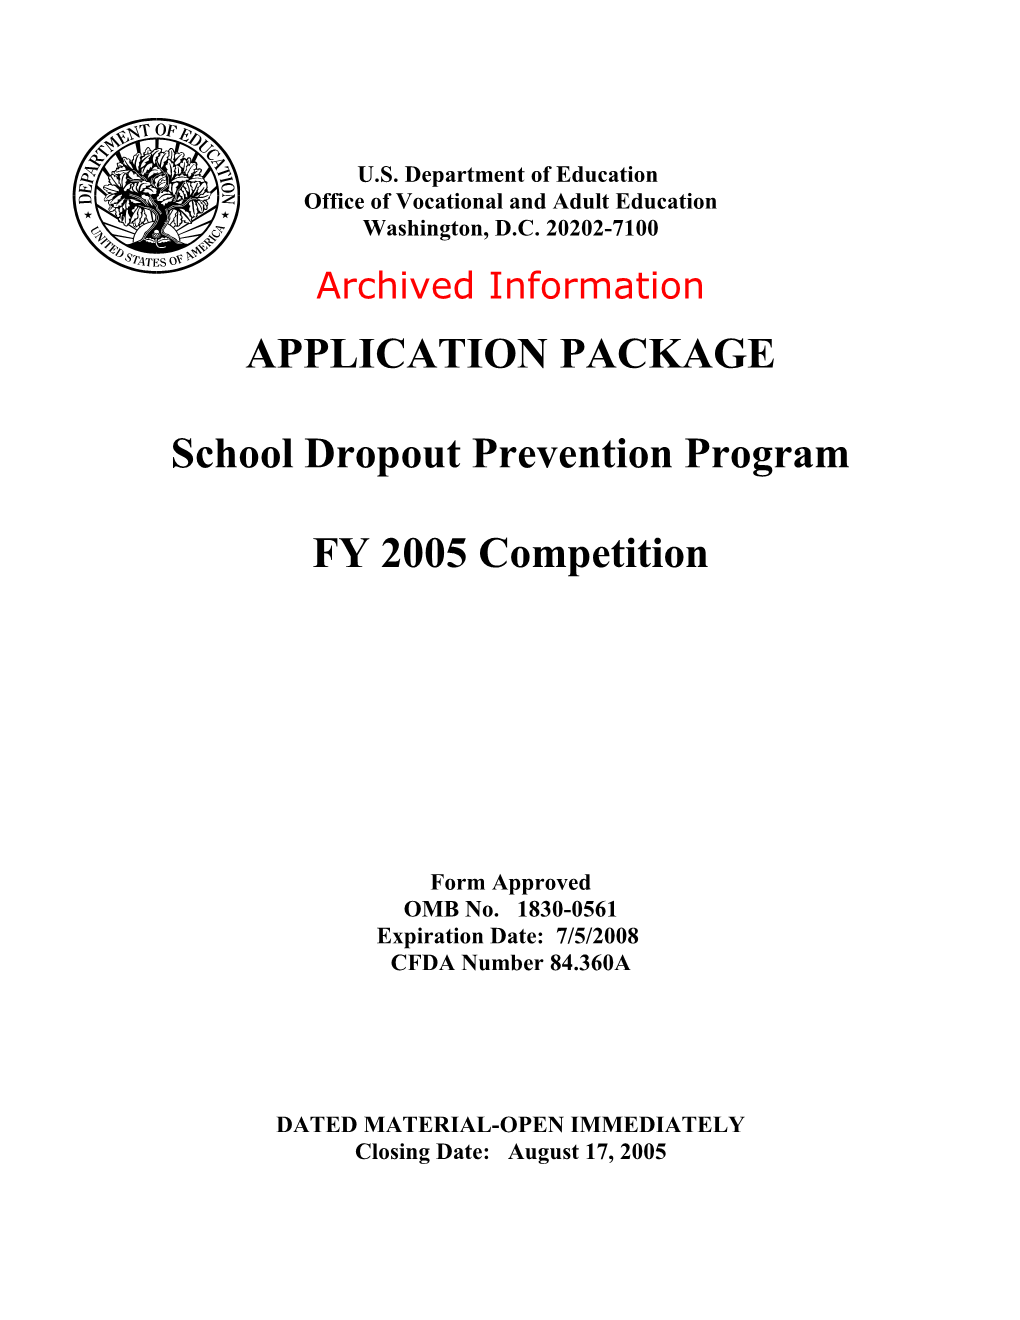 Archived: FY05 Application for the School Dropout Prevention Program (MS Word)